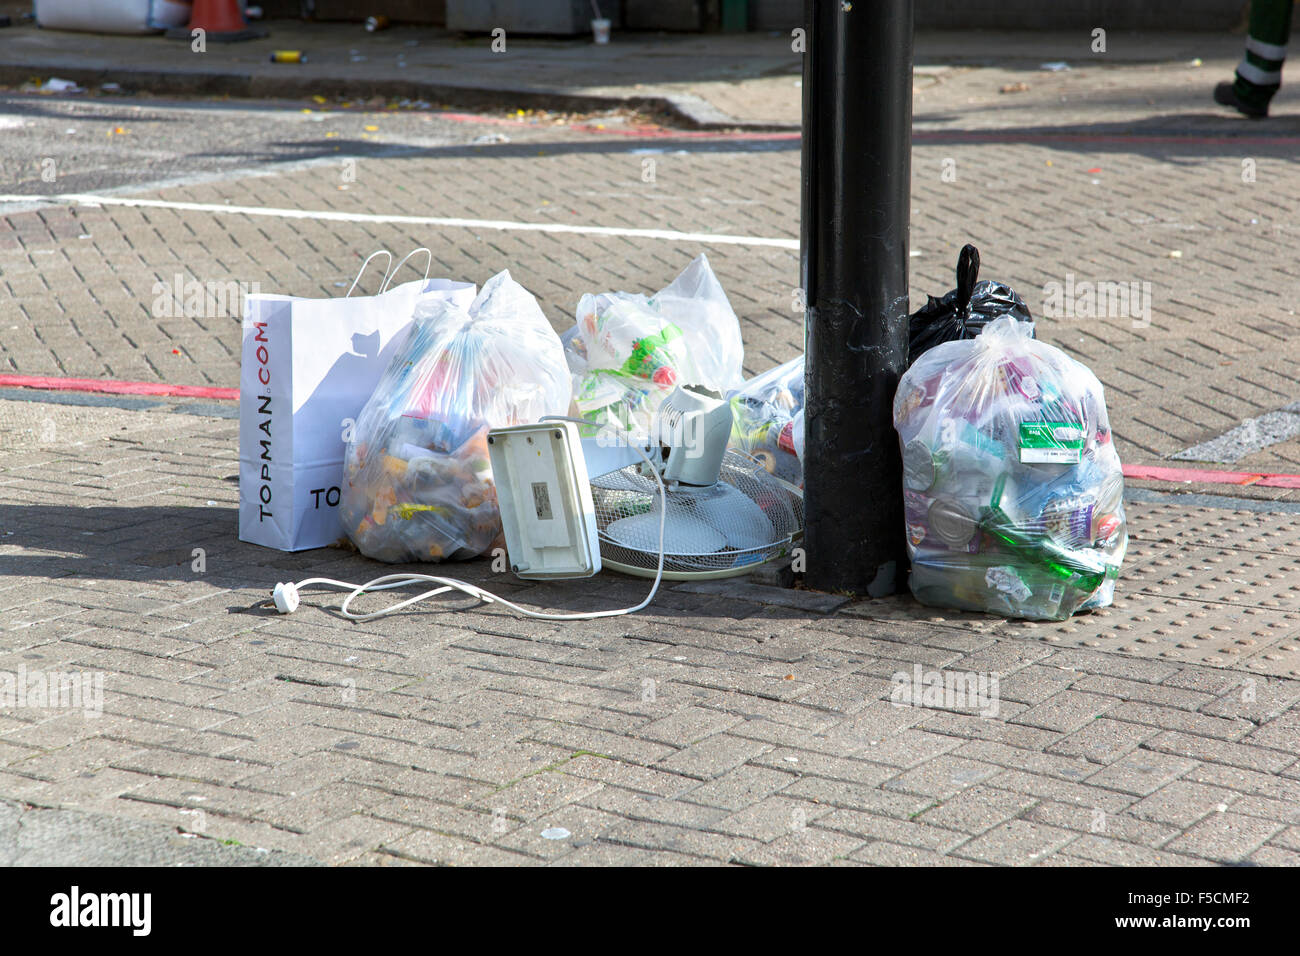 Bin bags and rubbish left on my a pole on the pavement, London, UK Stock Photo